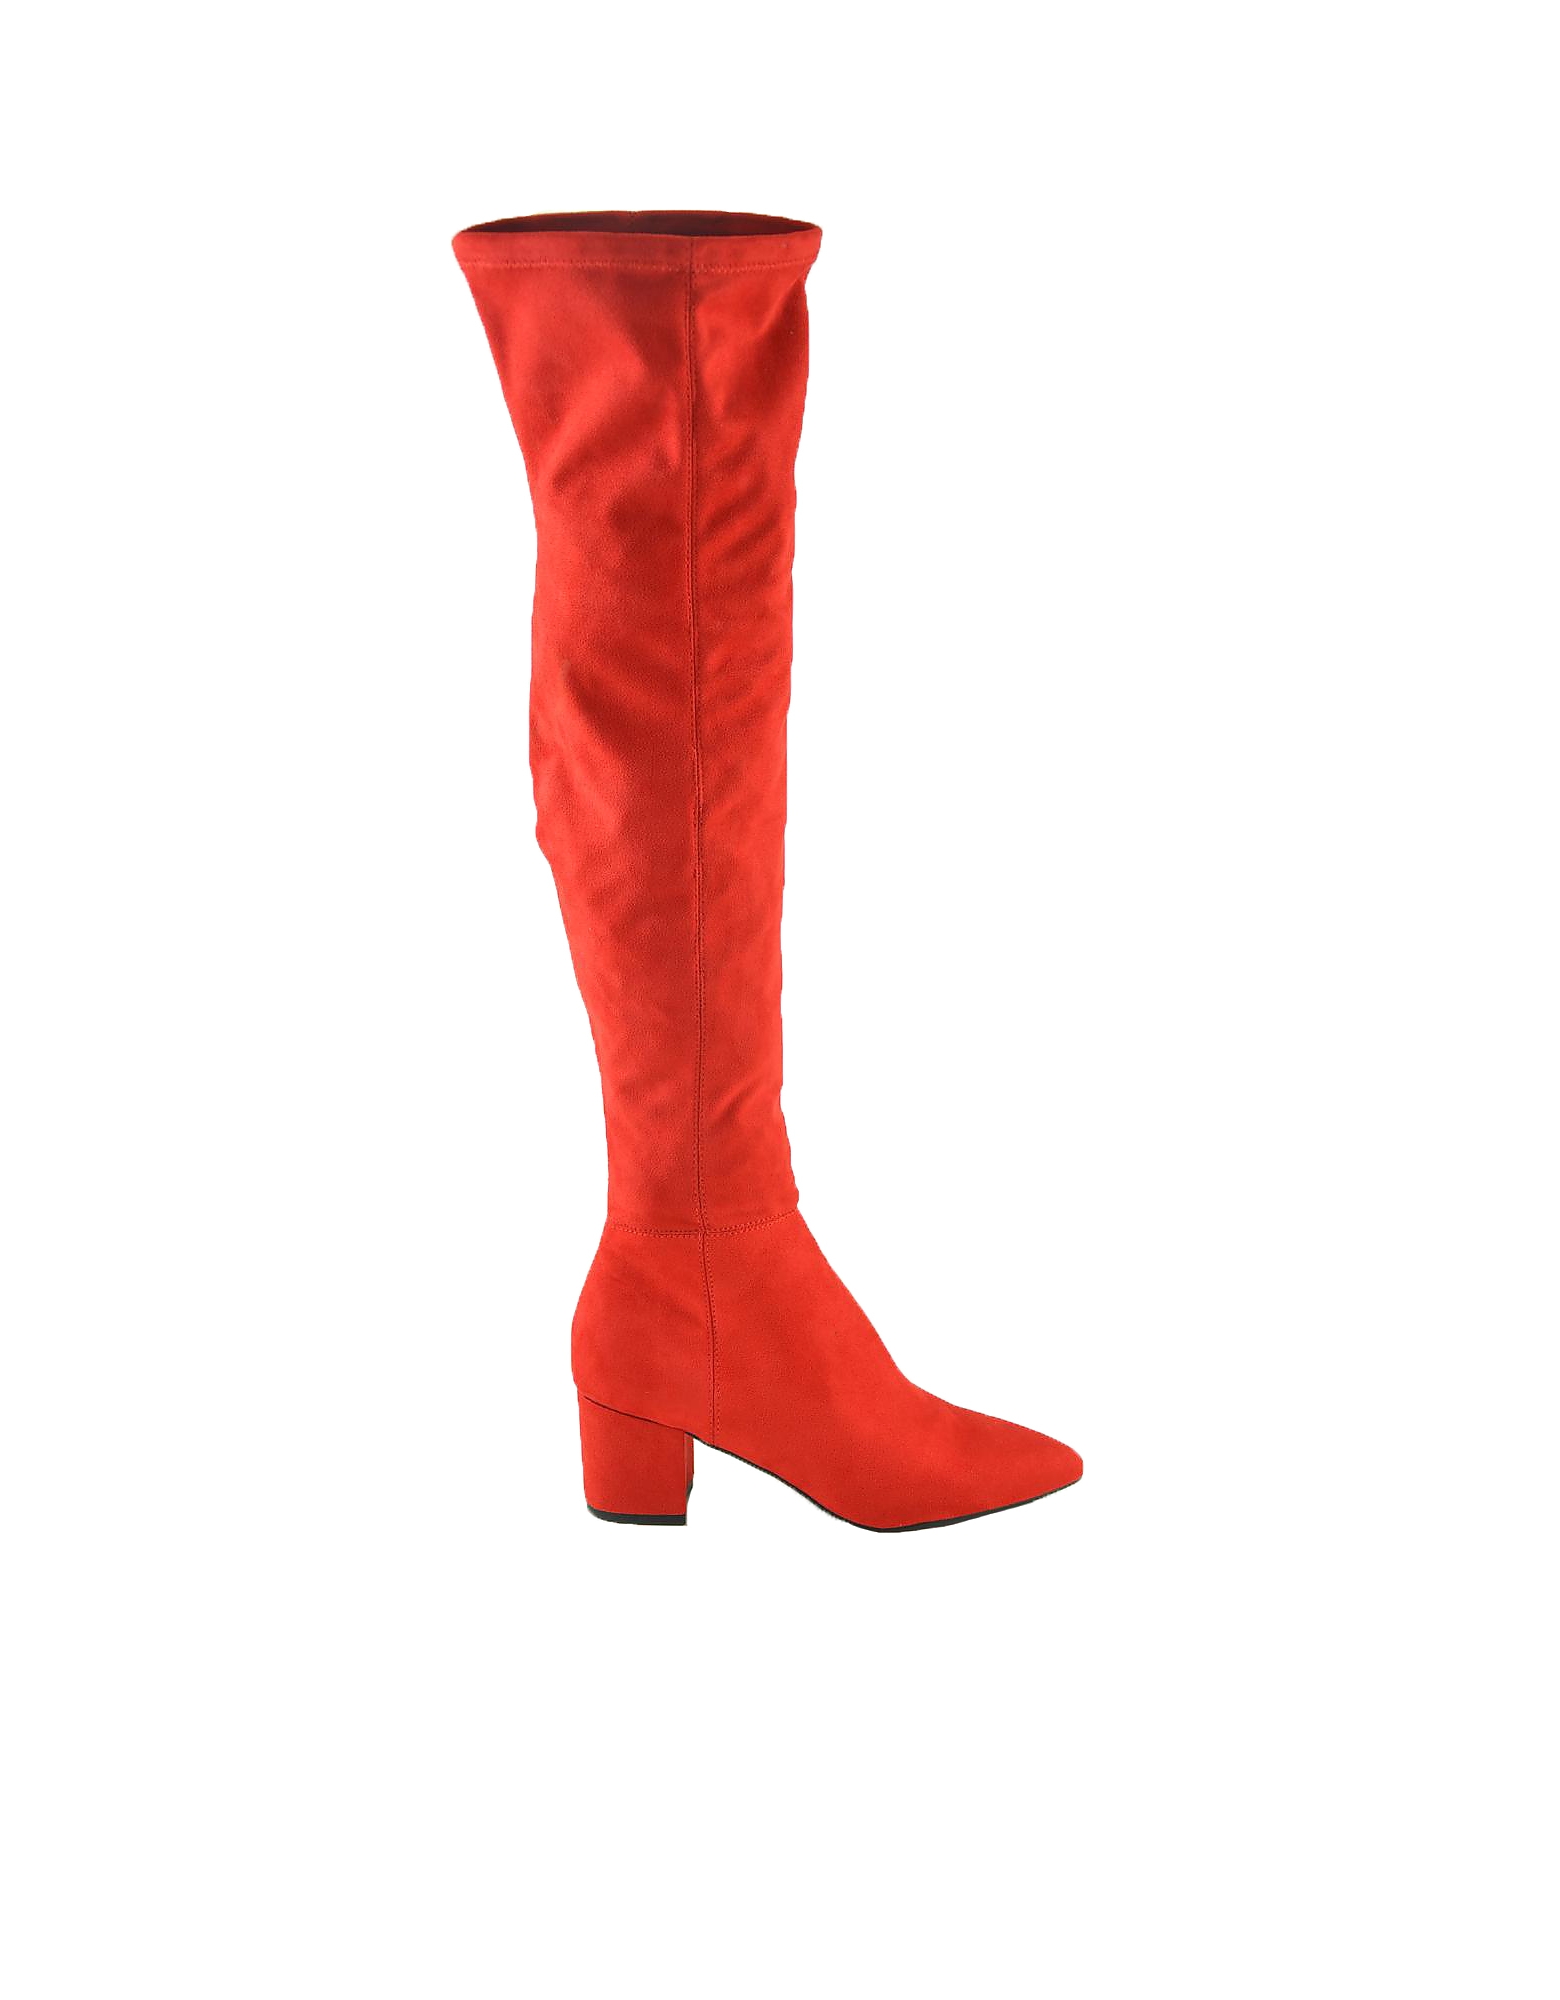 Steve Madden  Shoes Women's Red Boots